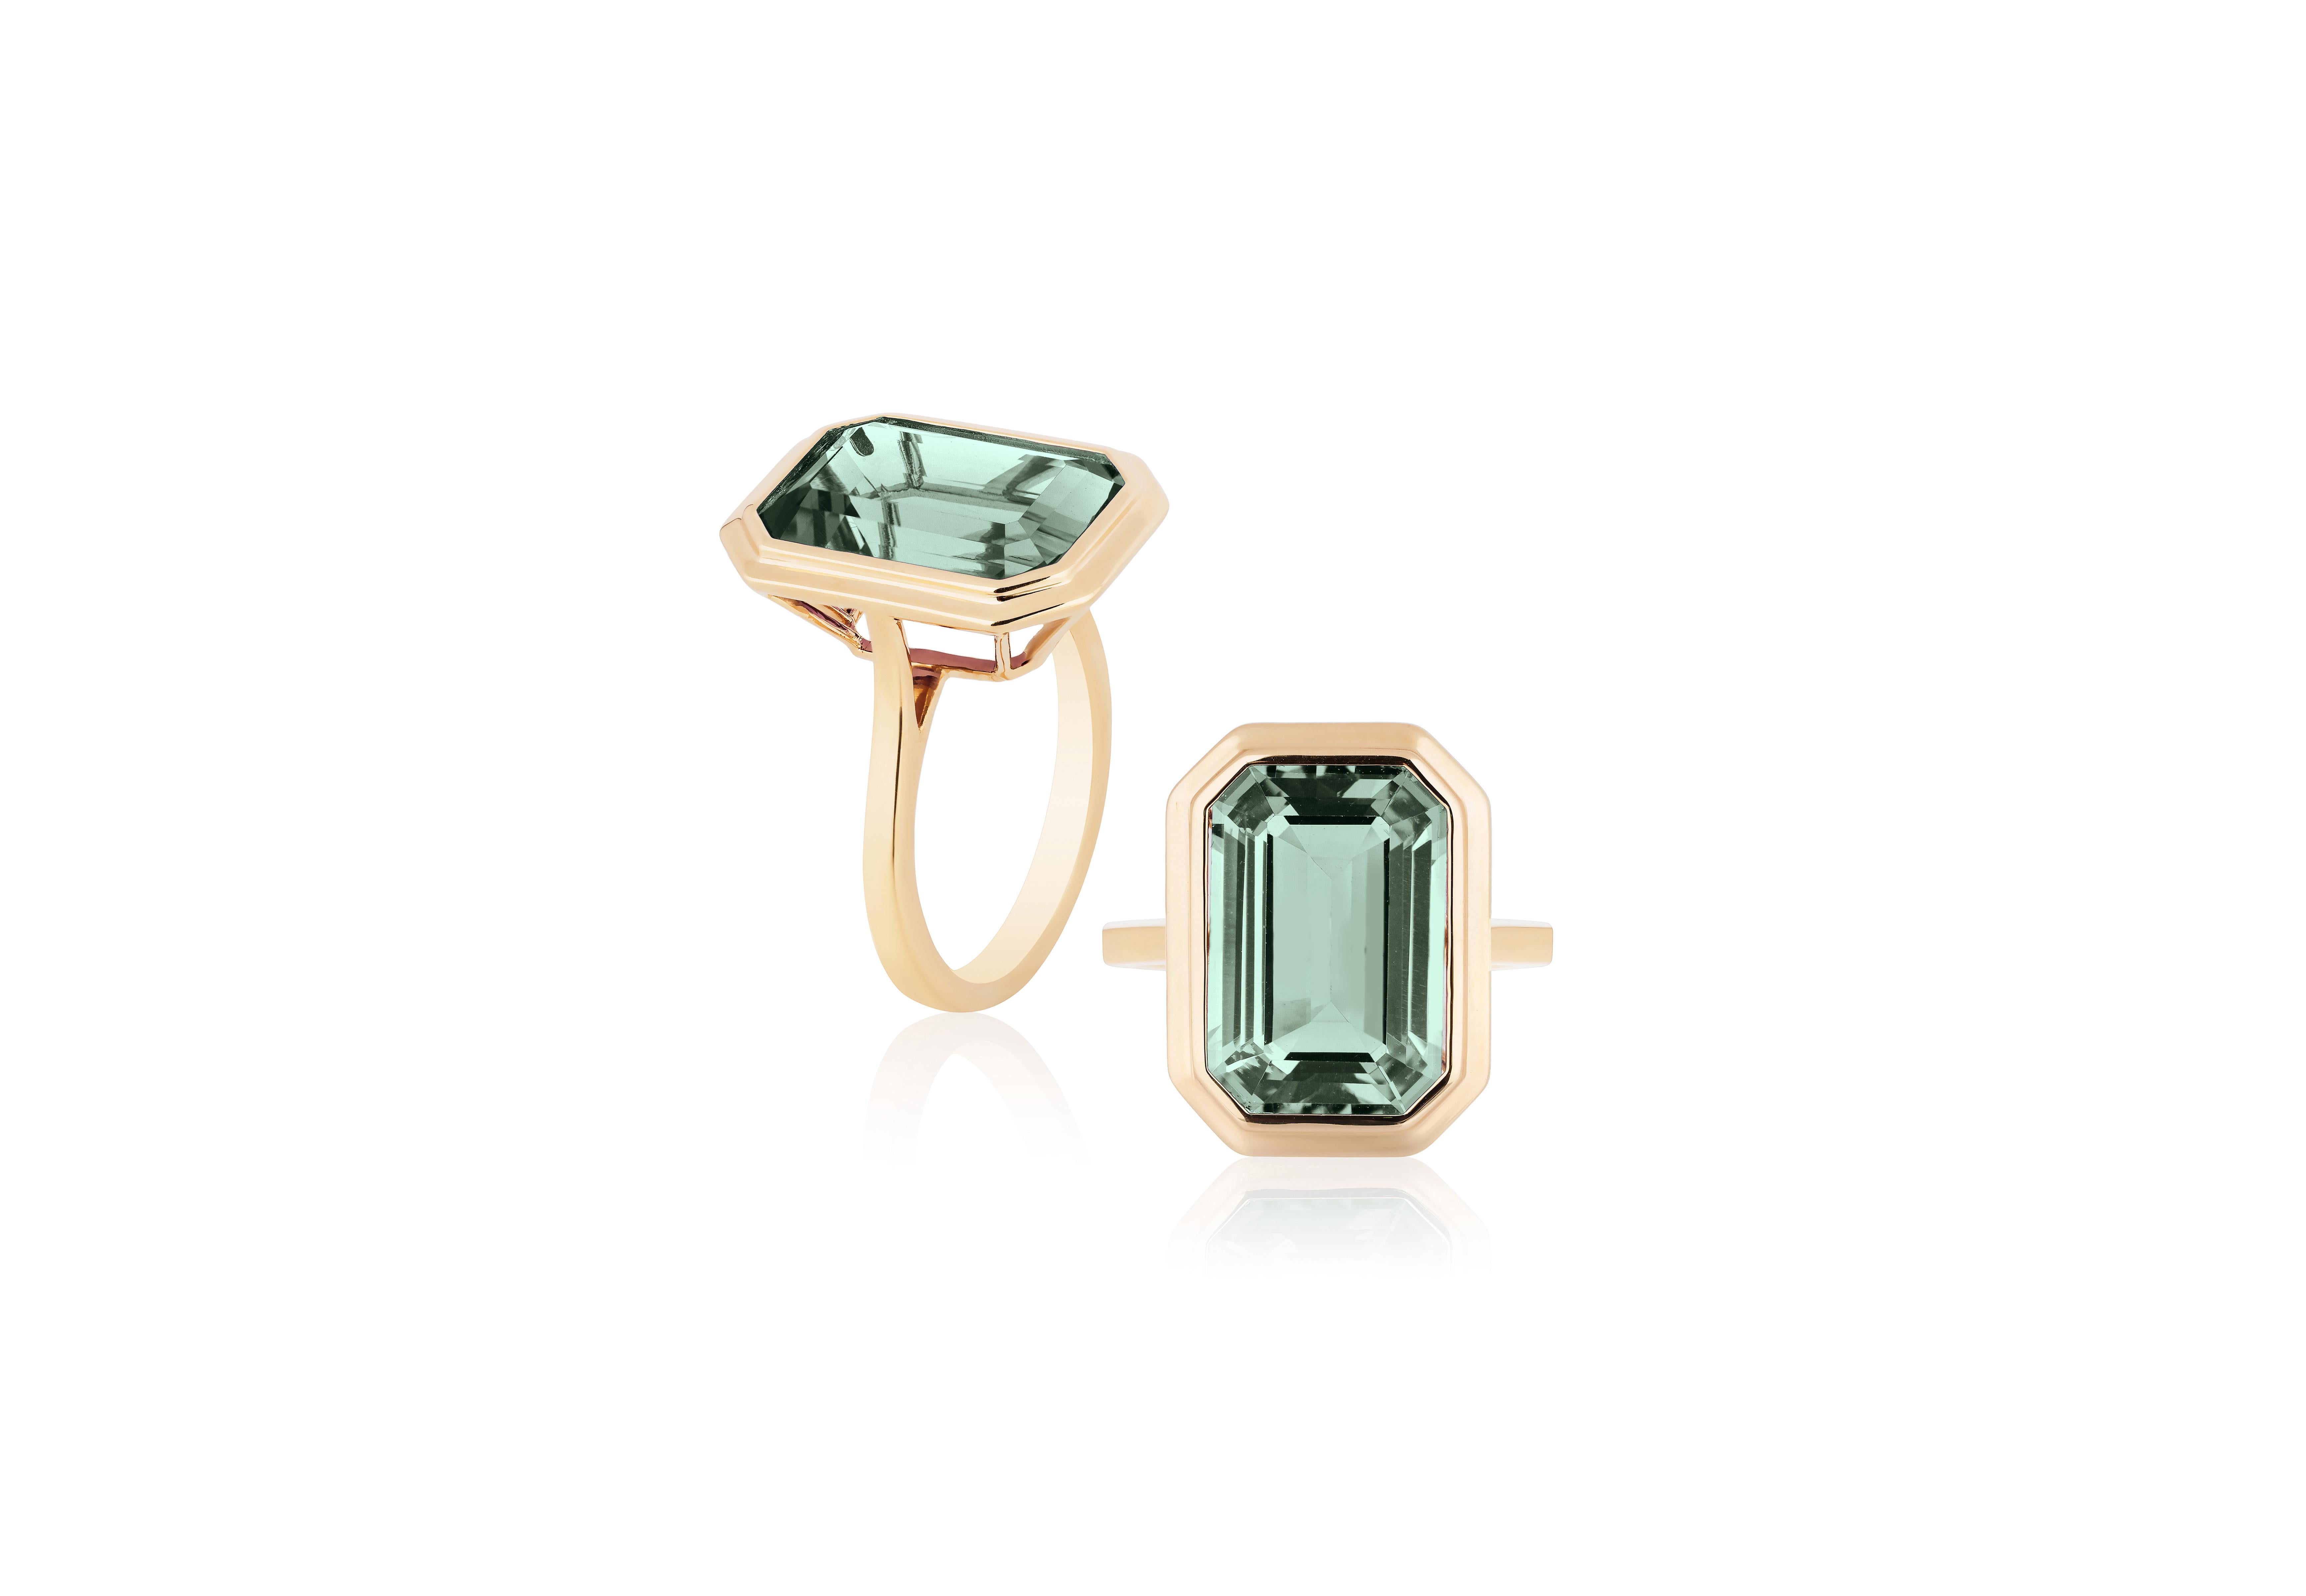 A classic yet an everyday bold statement piece, this amazing cocktail ring is part of our very new ‘Manhattan’ Collection. It has a 10 x 15 mm emerald cut Prasiolite in a bezel setting in 18k gold   ​

Minimalist lines yet bold structures is what